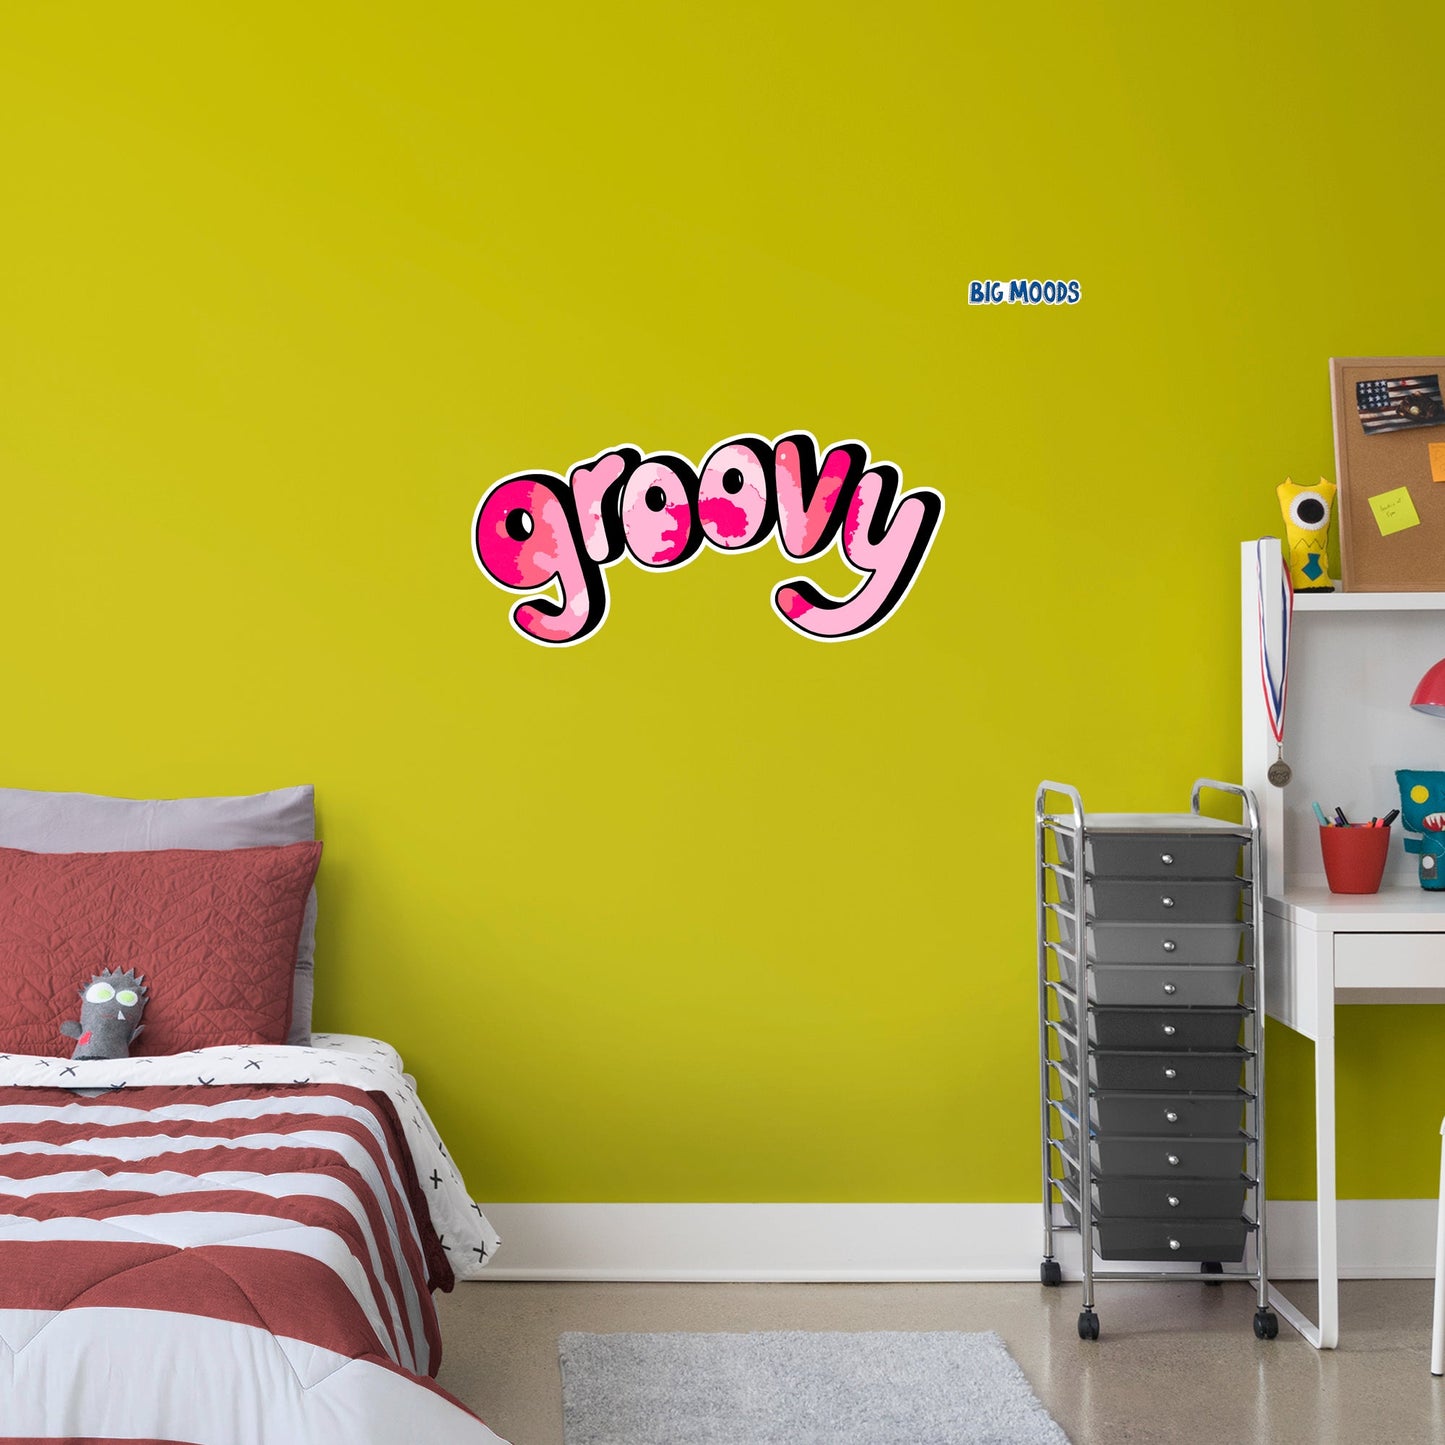 Groovy (Pink)        - Officially Licensed Big Moods Removable     Adhesive Decal